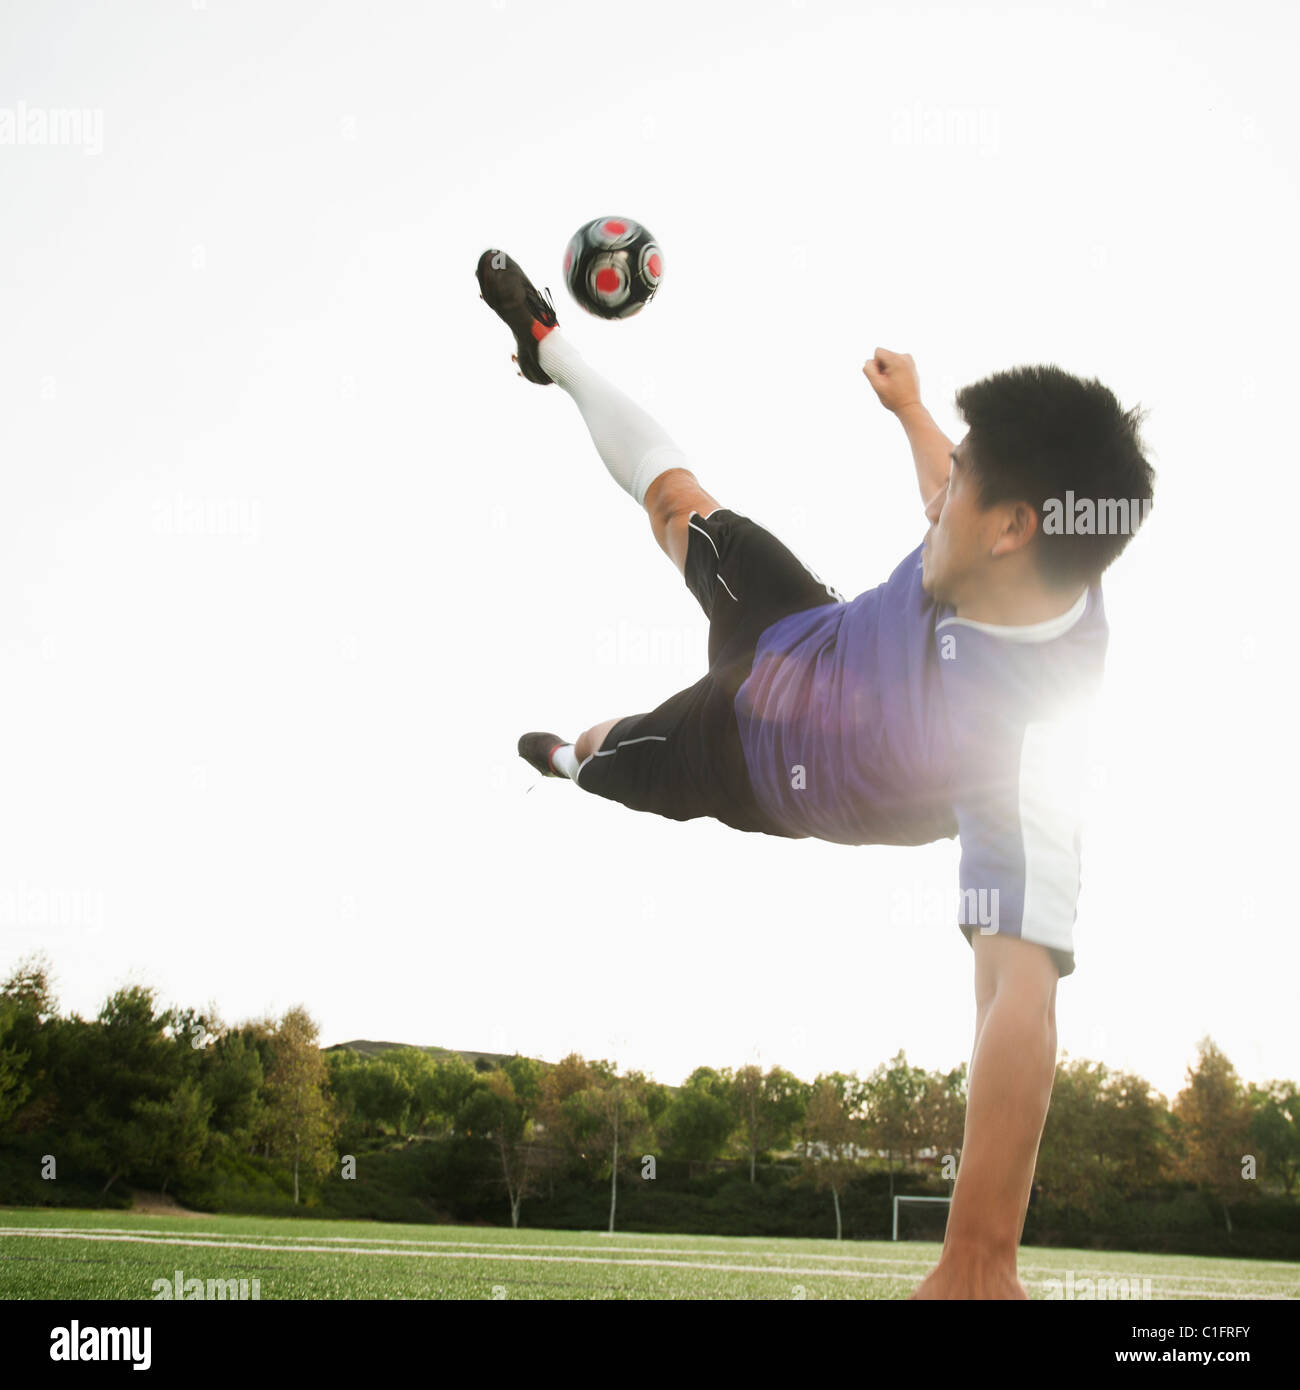 Asian soccer player in mid-air kicking soccer ball Stock Photo